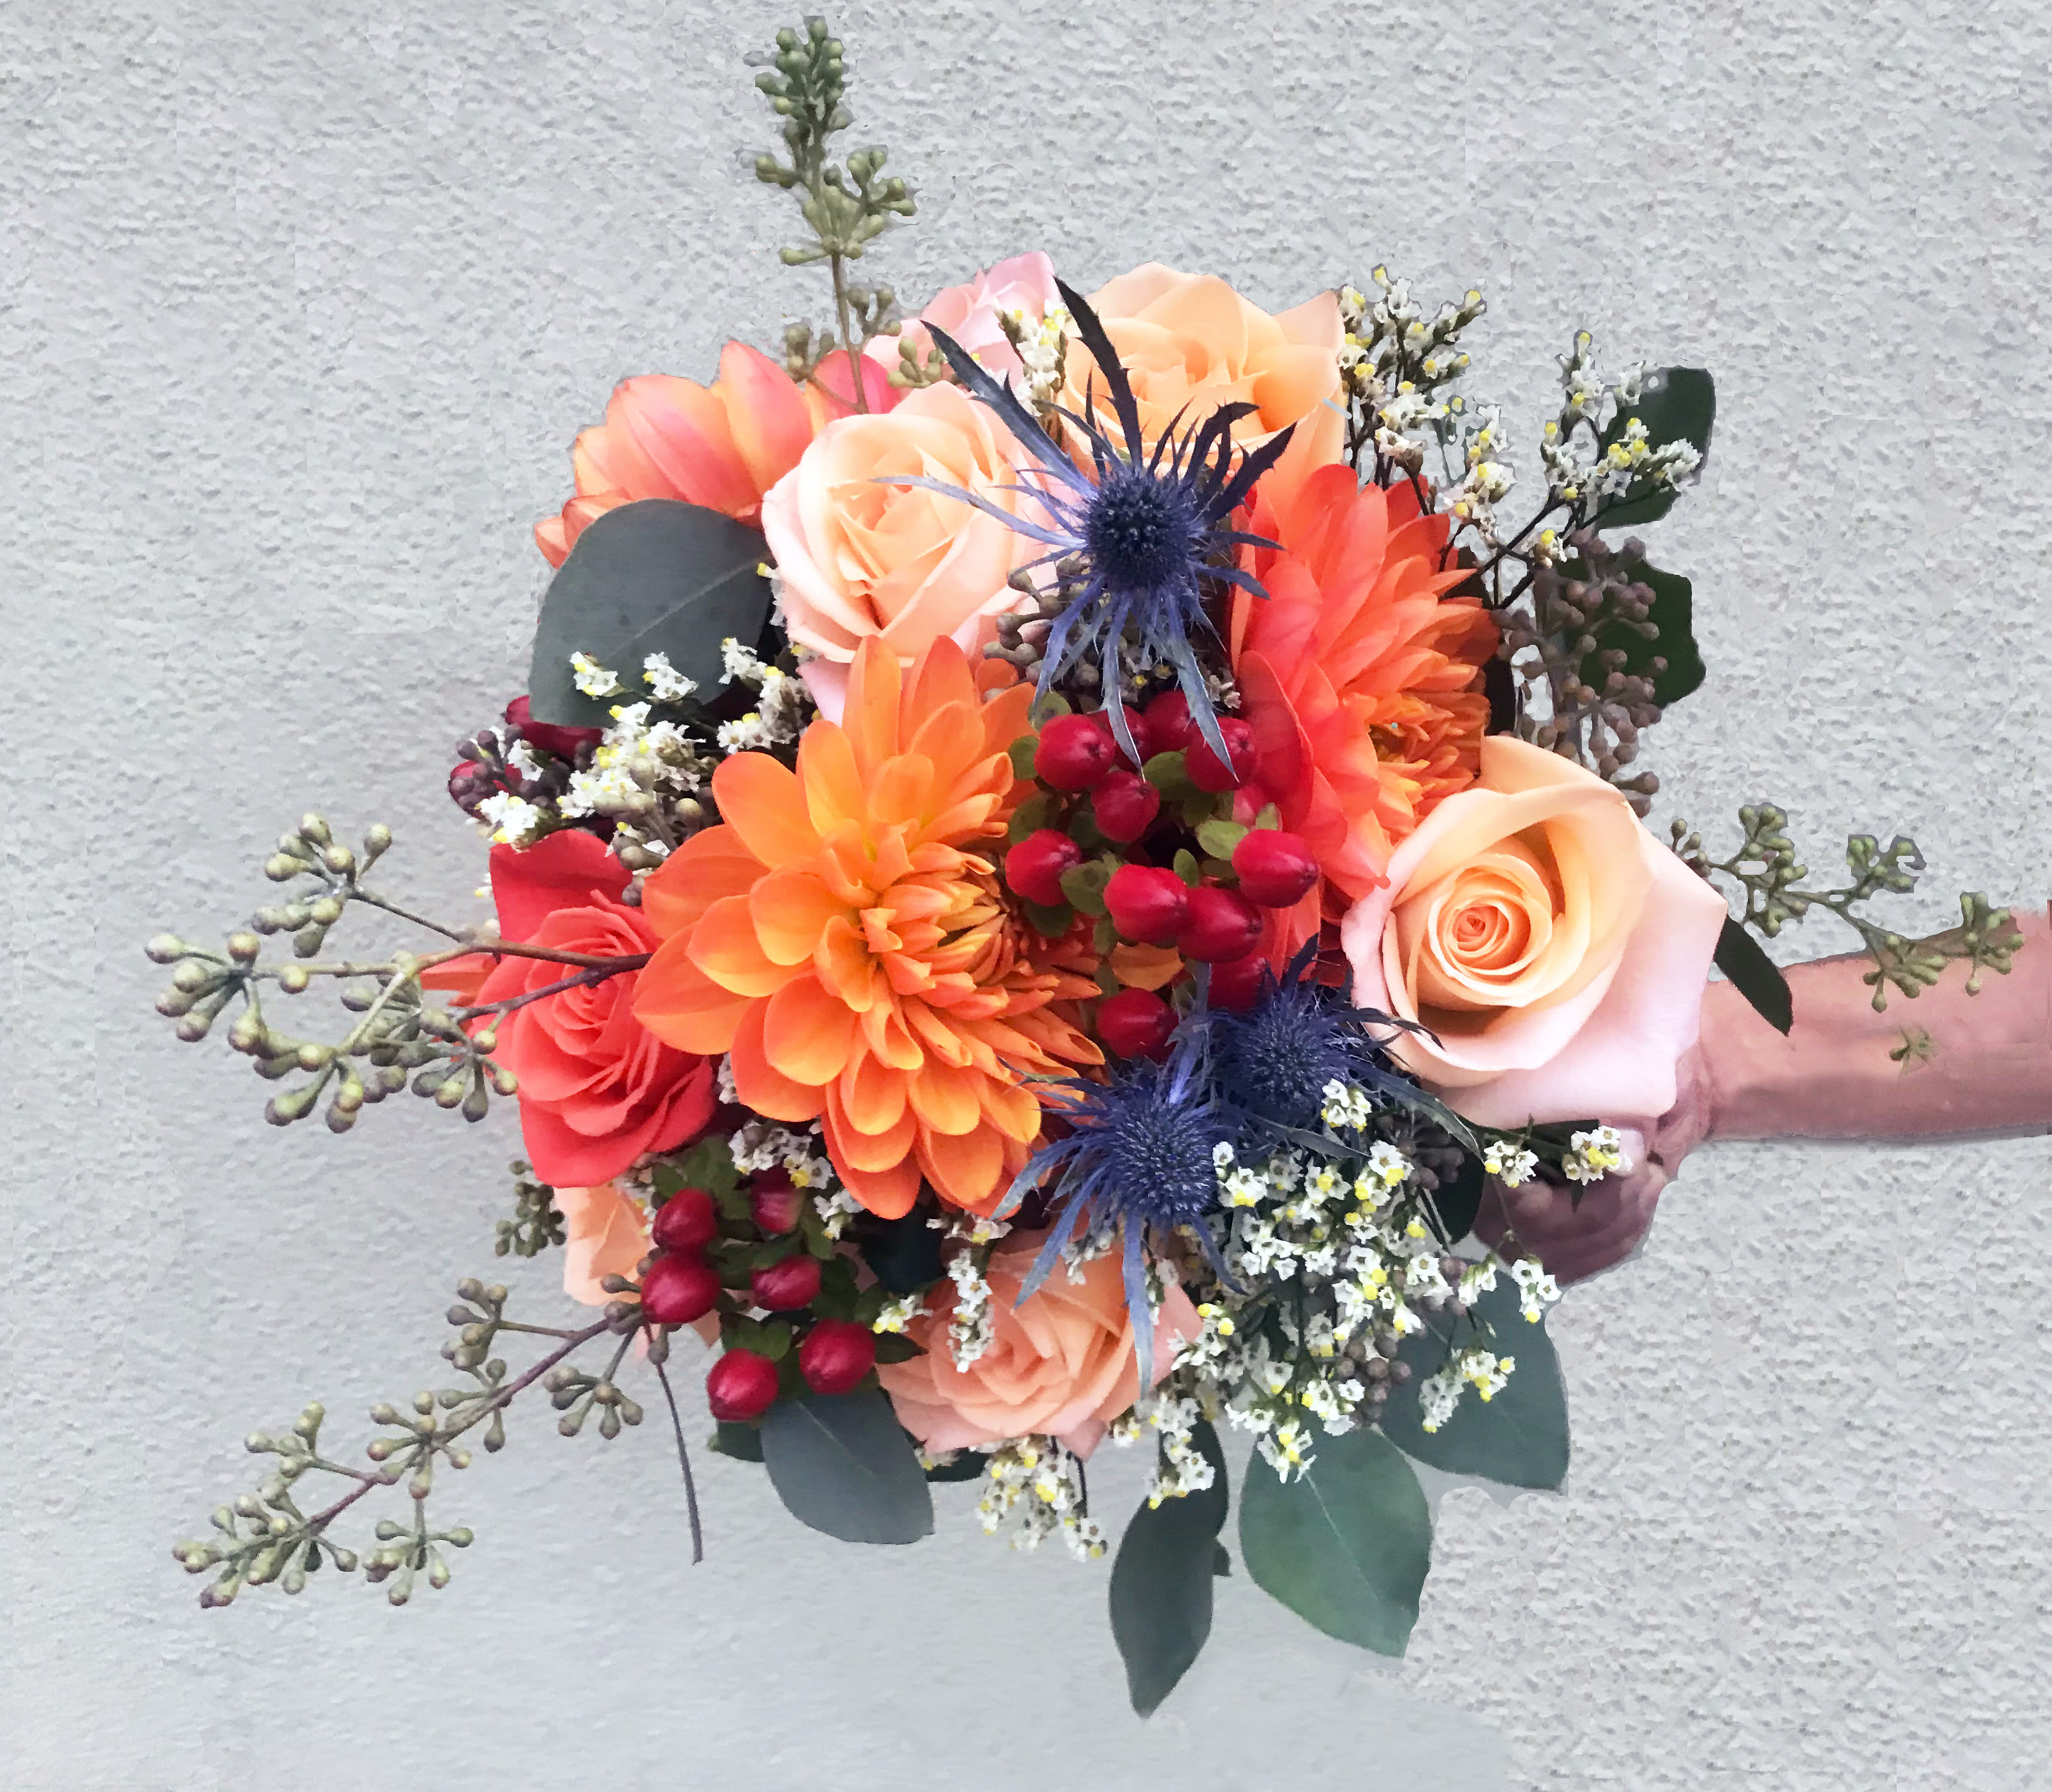 Fall Dahlia &amp; Rose Bouquet  - Fall Seasonal color handtied bouquet with Dahlias, Roses, Hypericum, Thistles, accented with seeded eucalyptus and fillers.